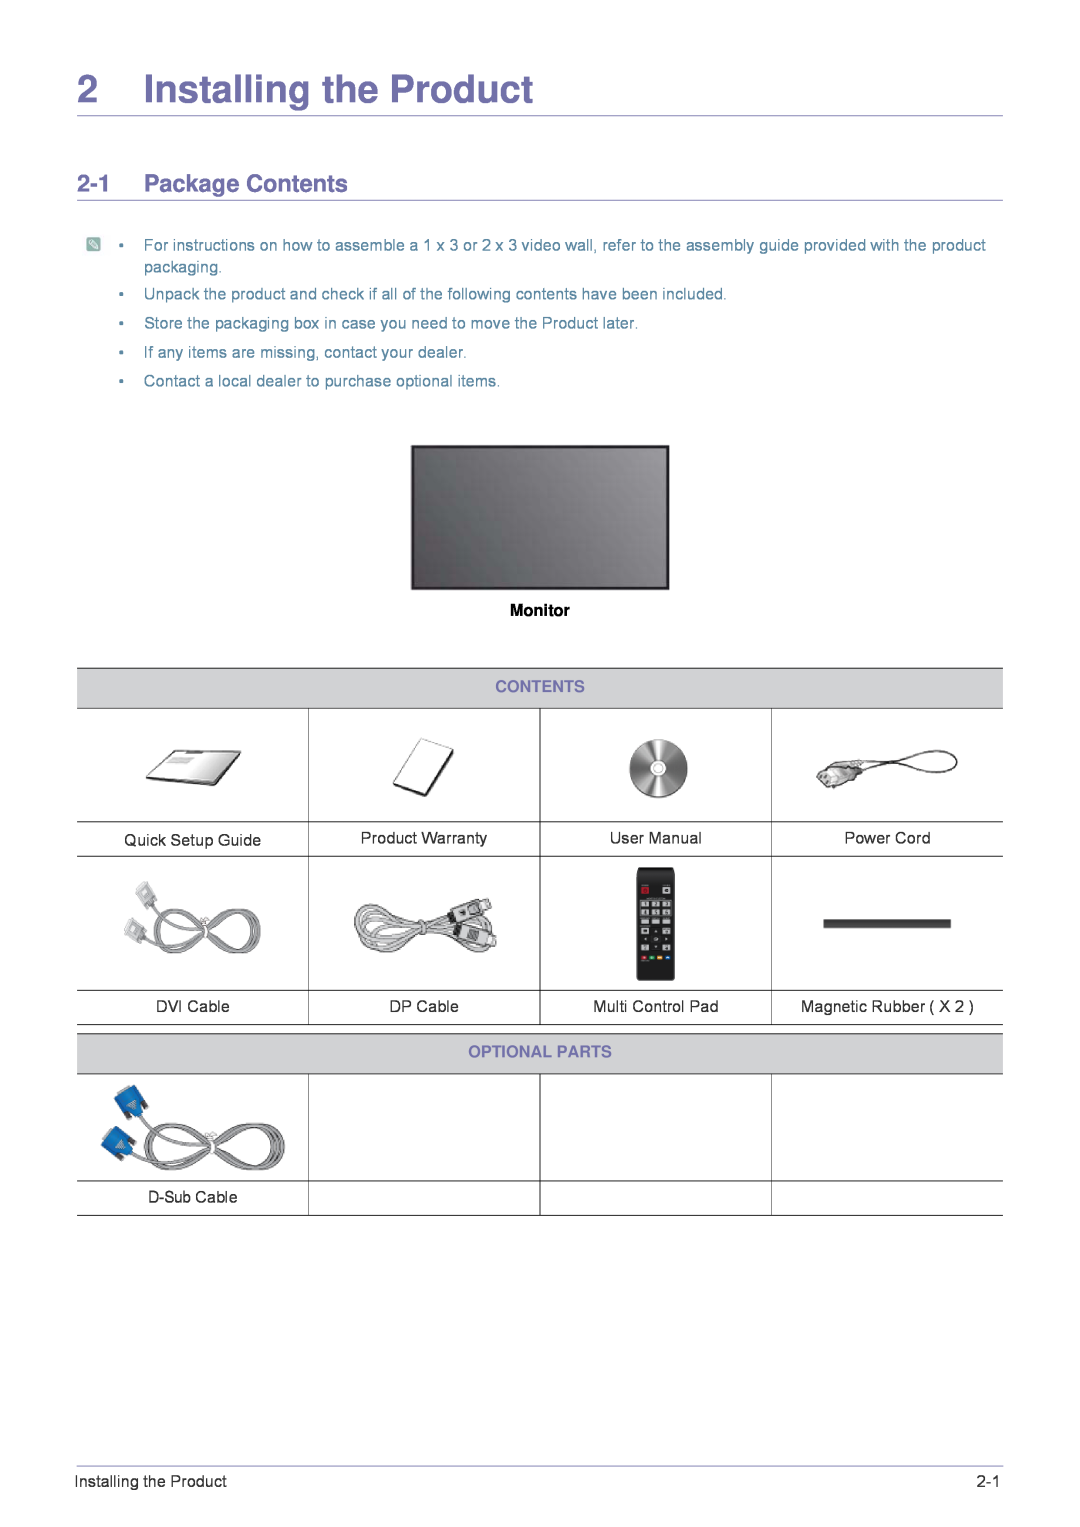 Samsung MD230X6, MD230X3 user manual Installing the Product, Package Contents, Monitor, Optional Parts 